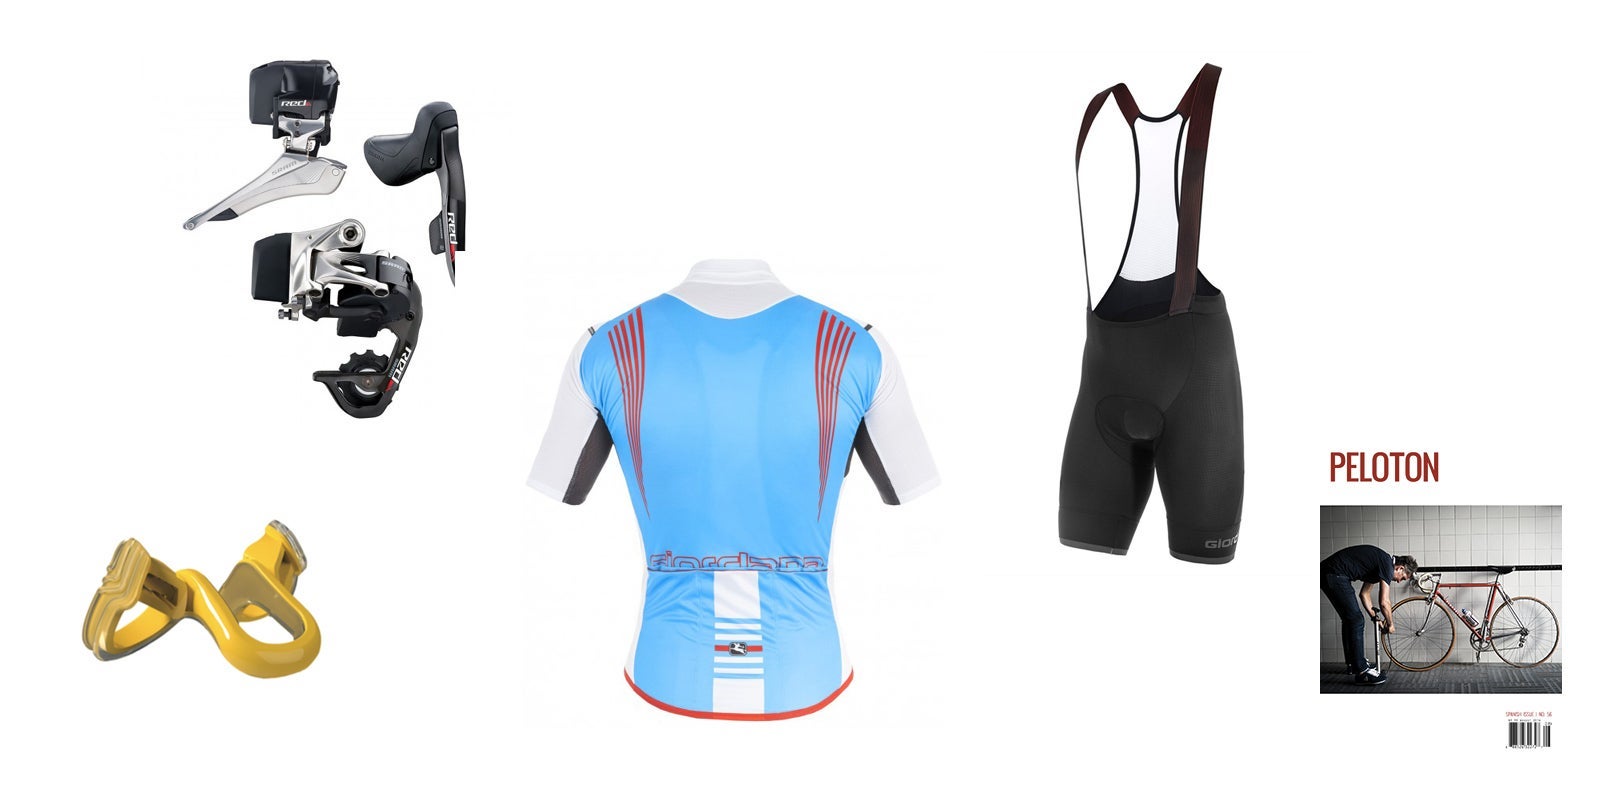 Orbea Long Retro Cycling Jersey Kit – Outdoor Good Store